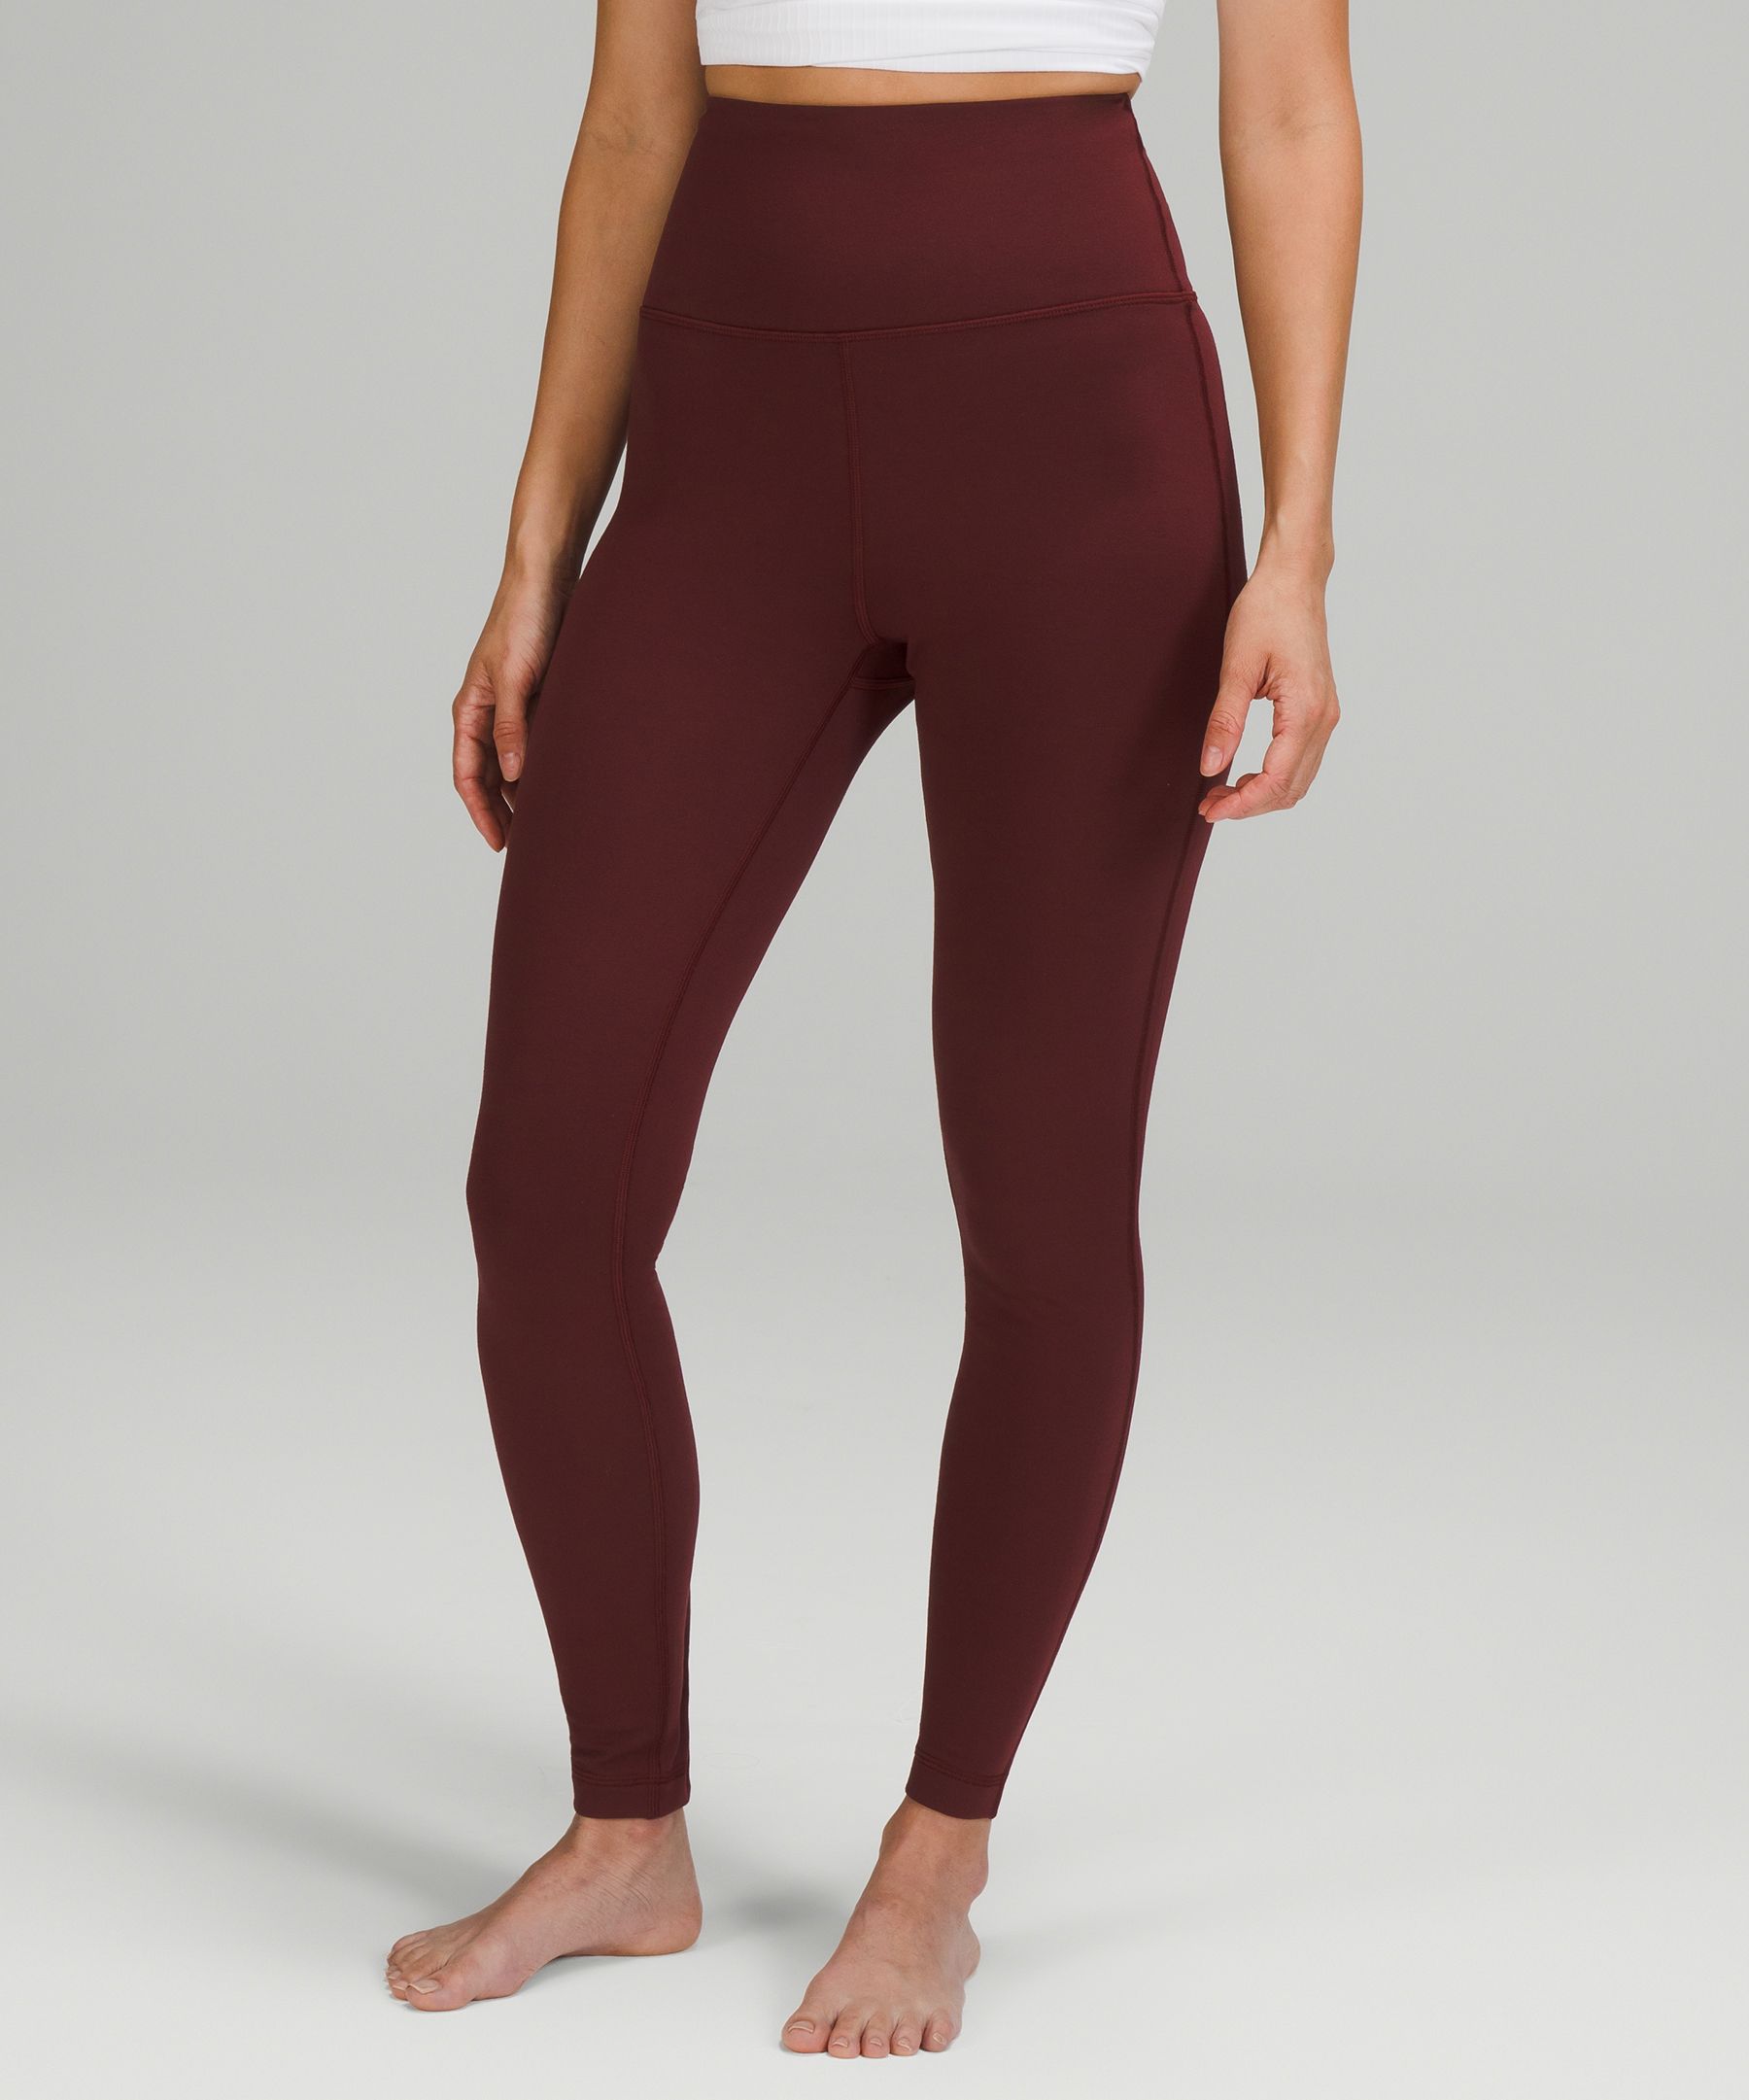 Wunder Lounge Super High-Rise Tight 26